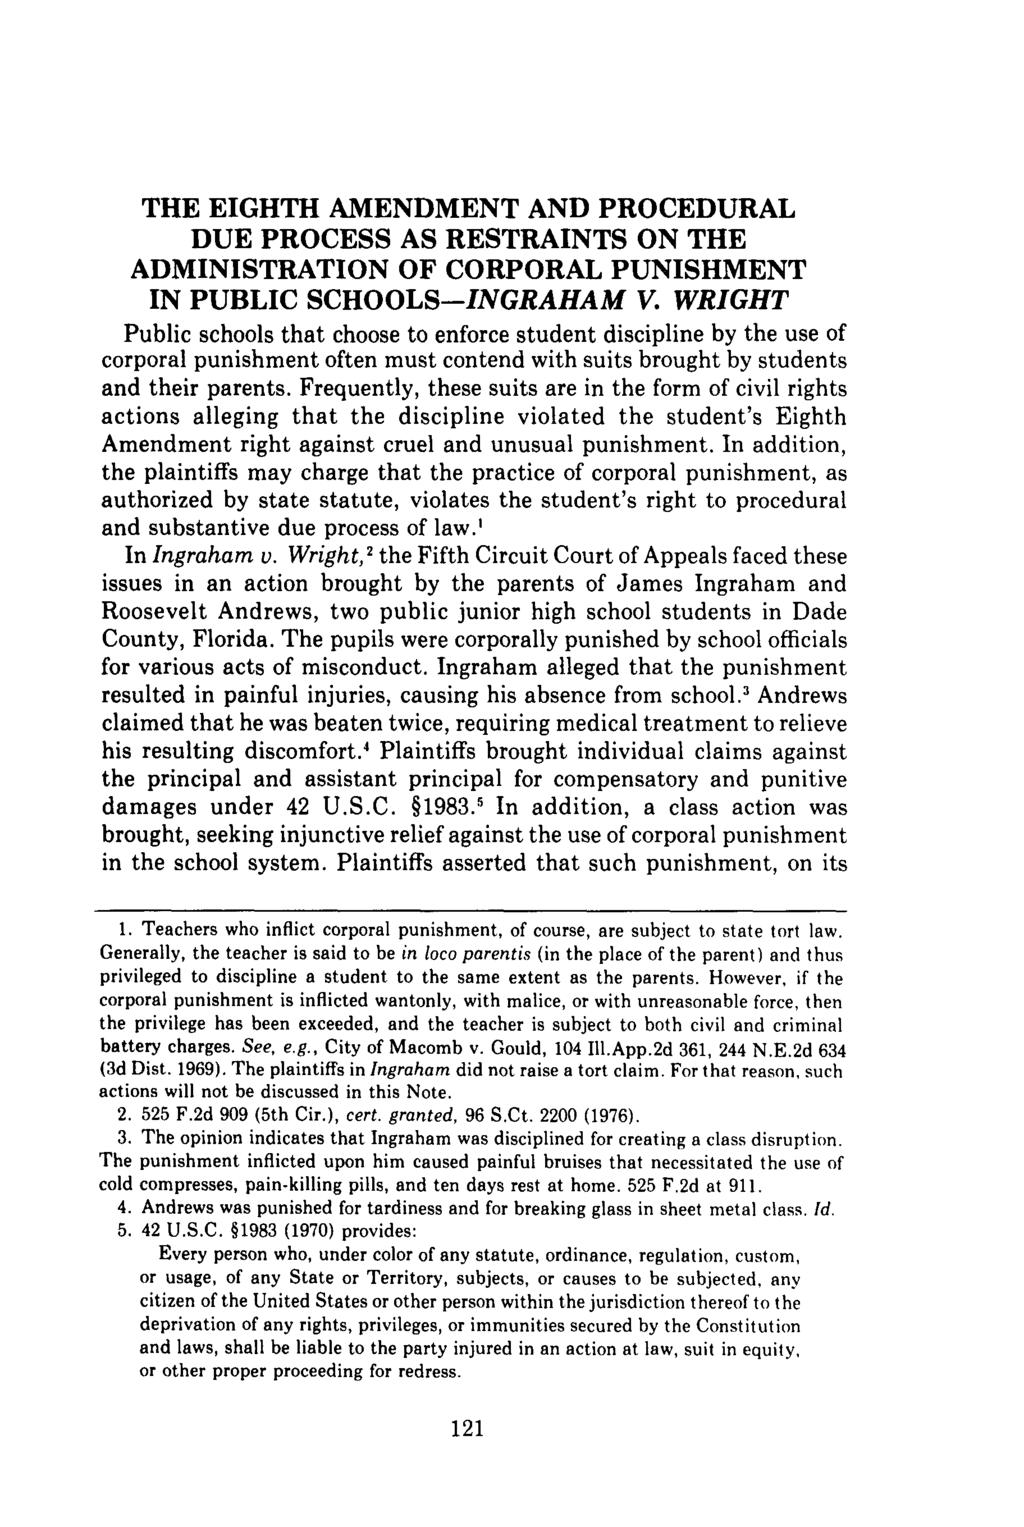 THE EIGHTH AMENDMENT AND PROCEDURAL DUE PROCESS AS RESTRAINTS ON THE ADMINISTRATION OF CORPORAL PUNISHMENT IN PUBLIC SCHOOLS-INGRAHAM V.